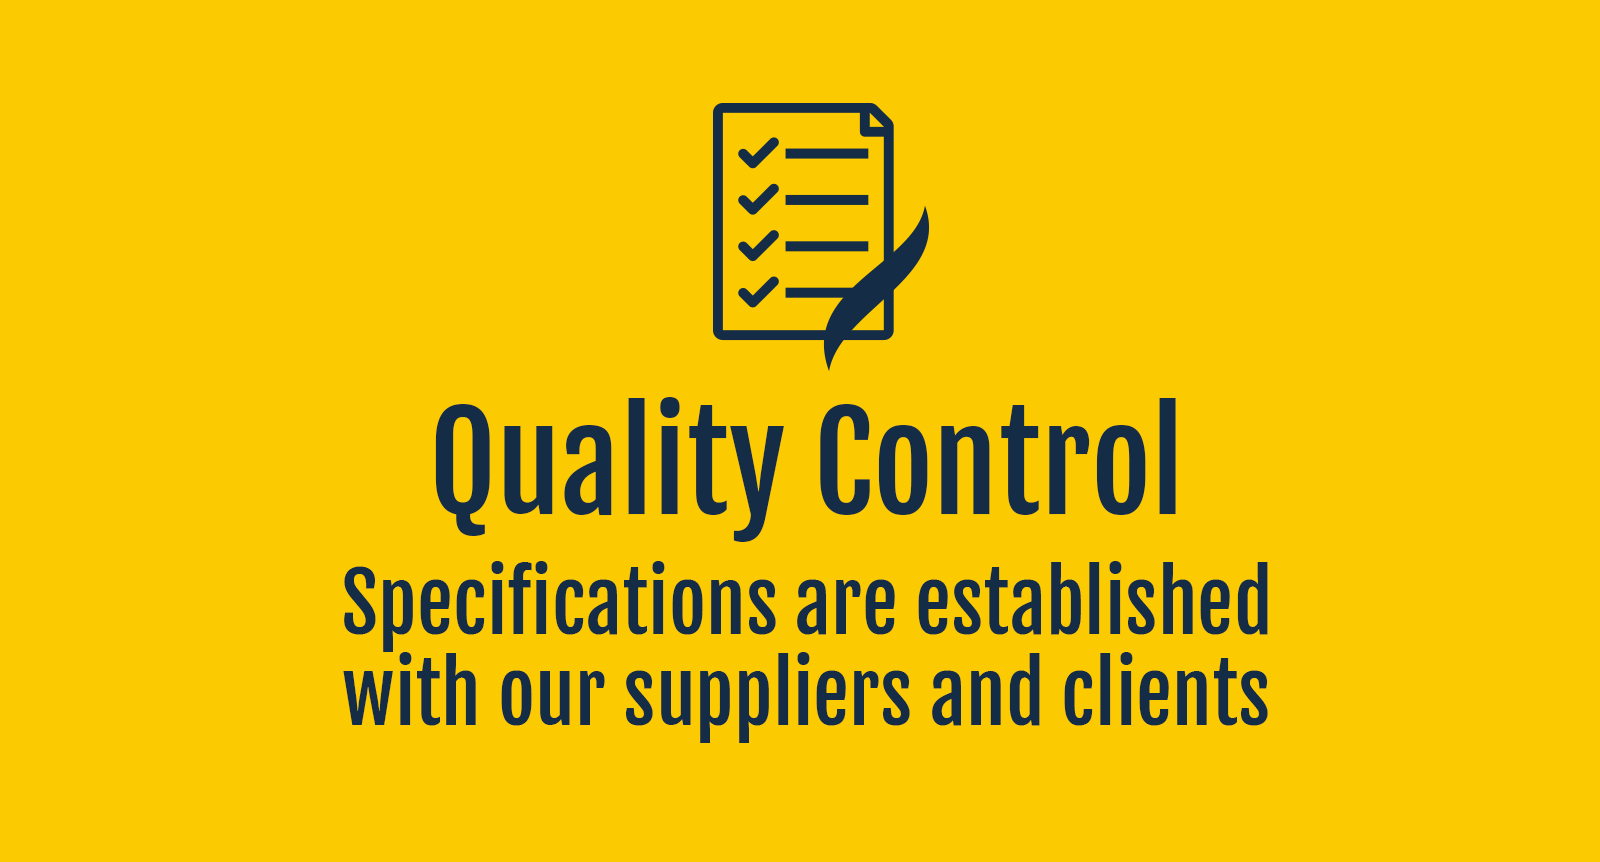 exofood quality control specifications are established with our suppliers and clients